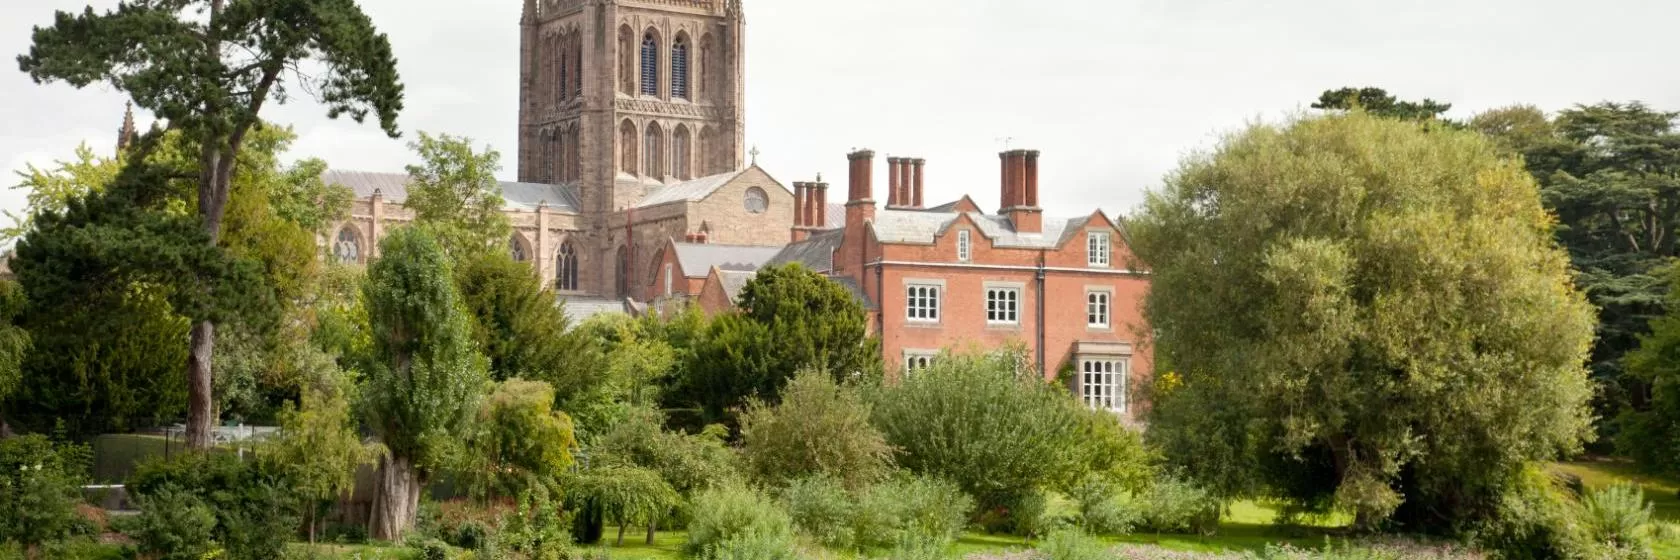 Hereford, Herefordshire Hotels